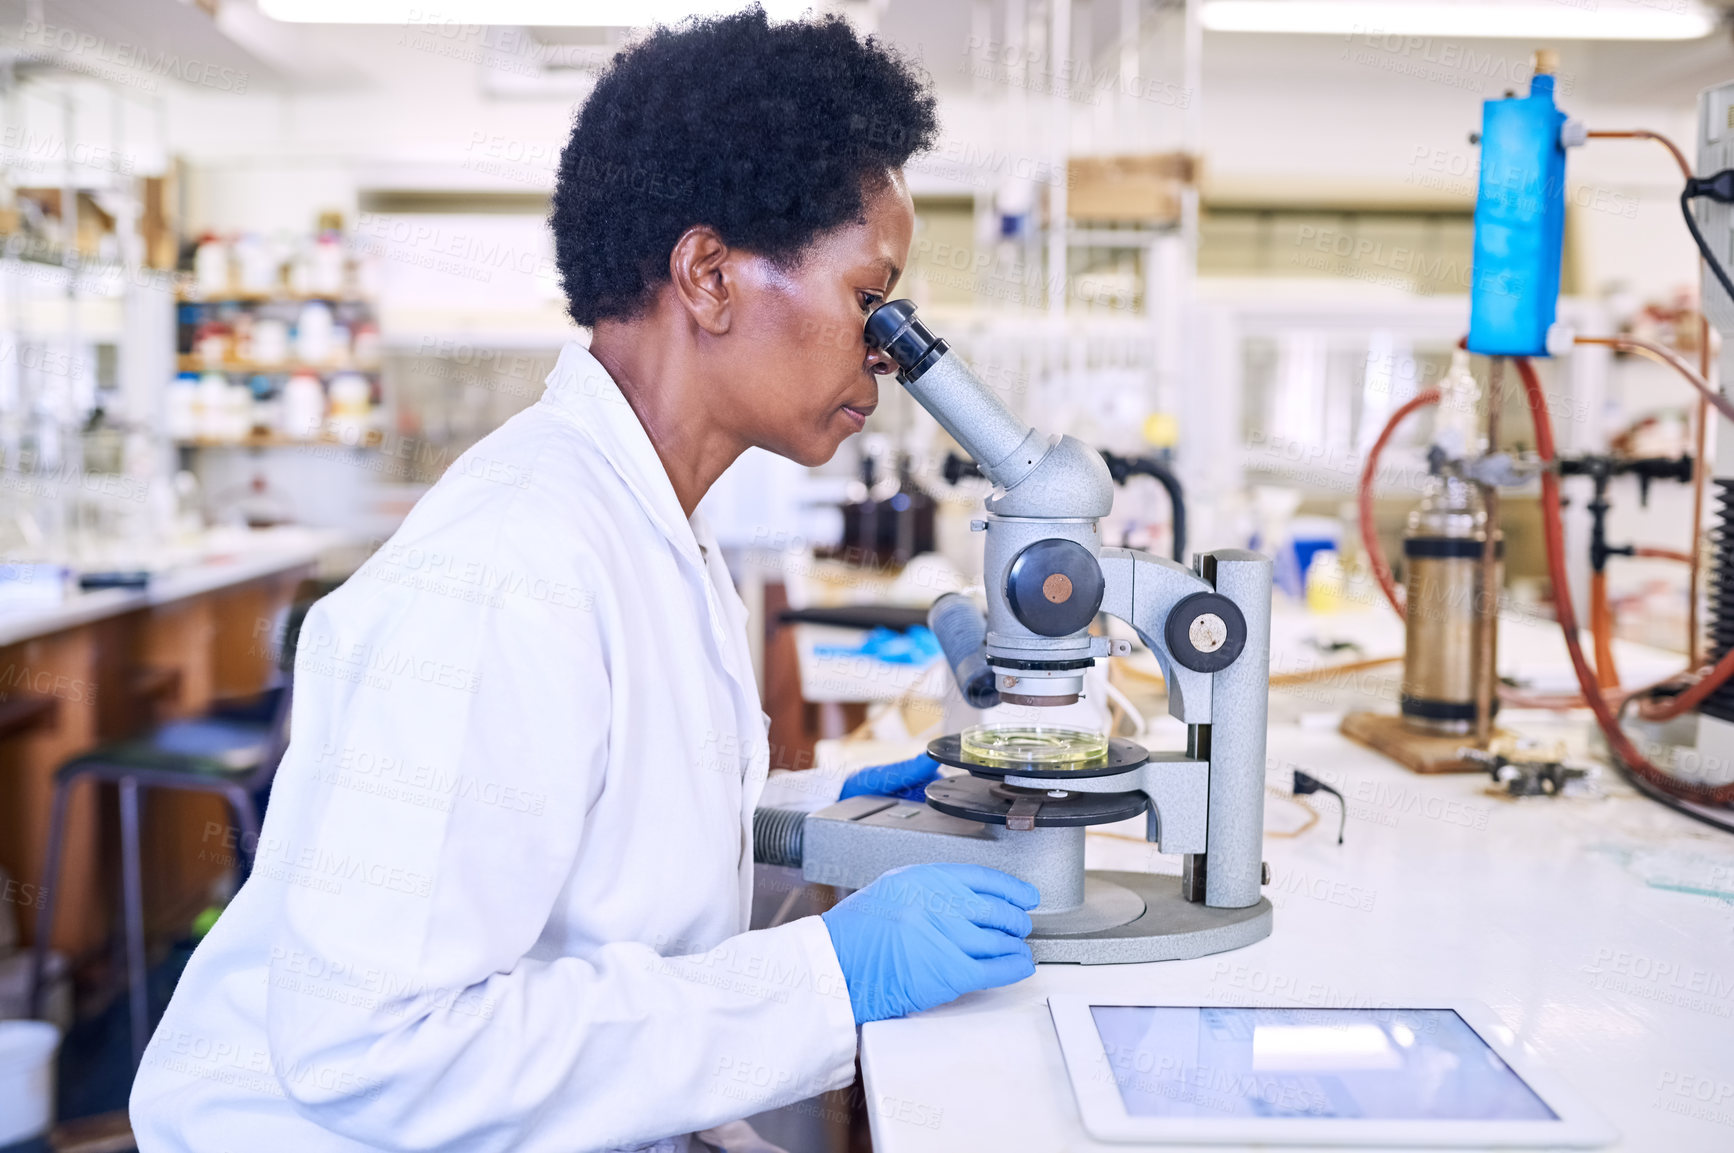 Buy stock photo Shot of a female scientist using a microscope in a lab